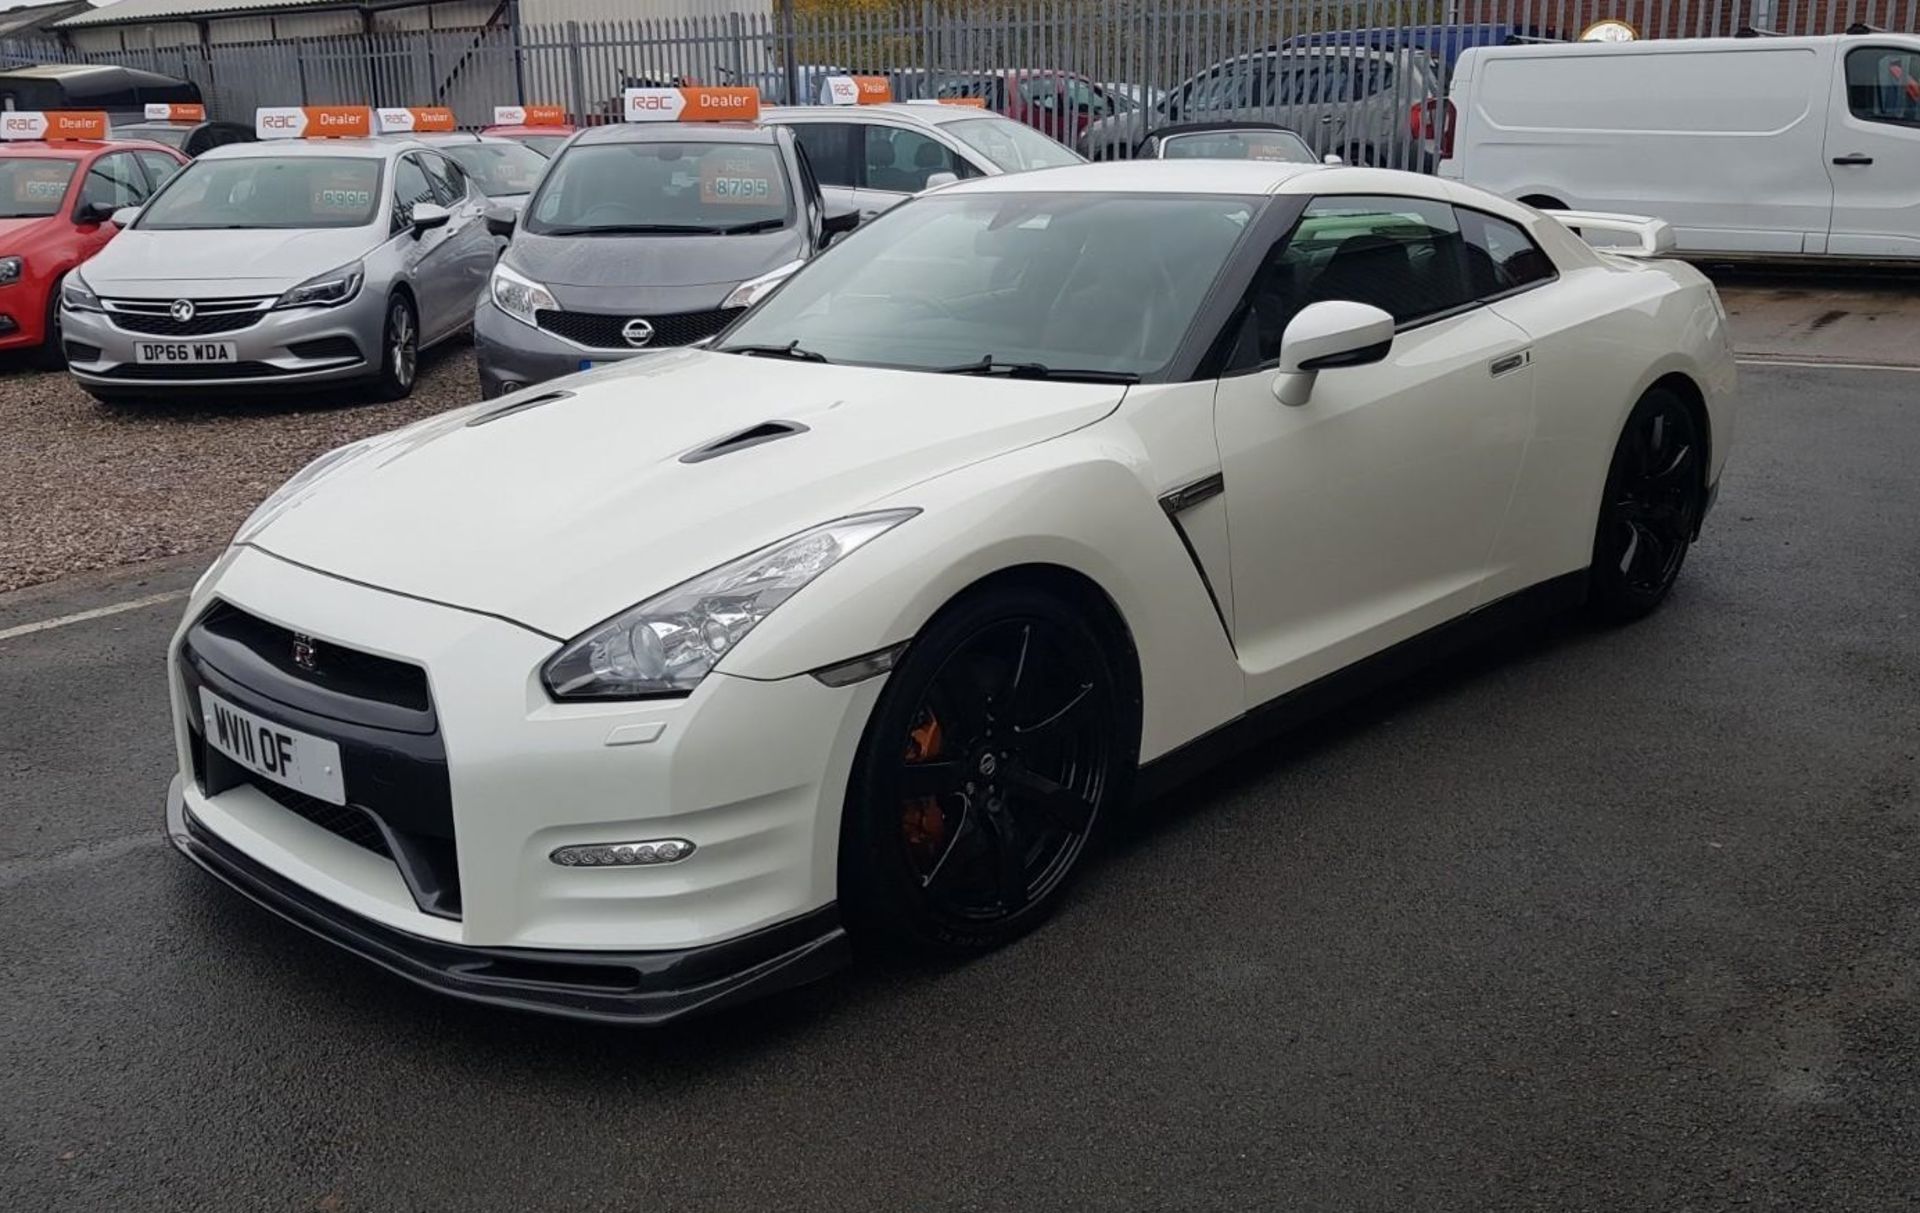 2011 NISSAN GT-R R35 750 stage 5 PREMIUM EDITION S-A 1 OWNER FROM NEW 19.5K MILES WARRANTED! no vat - Image 3 of 7